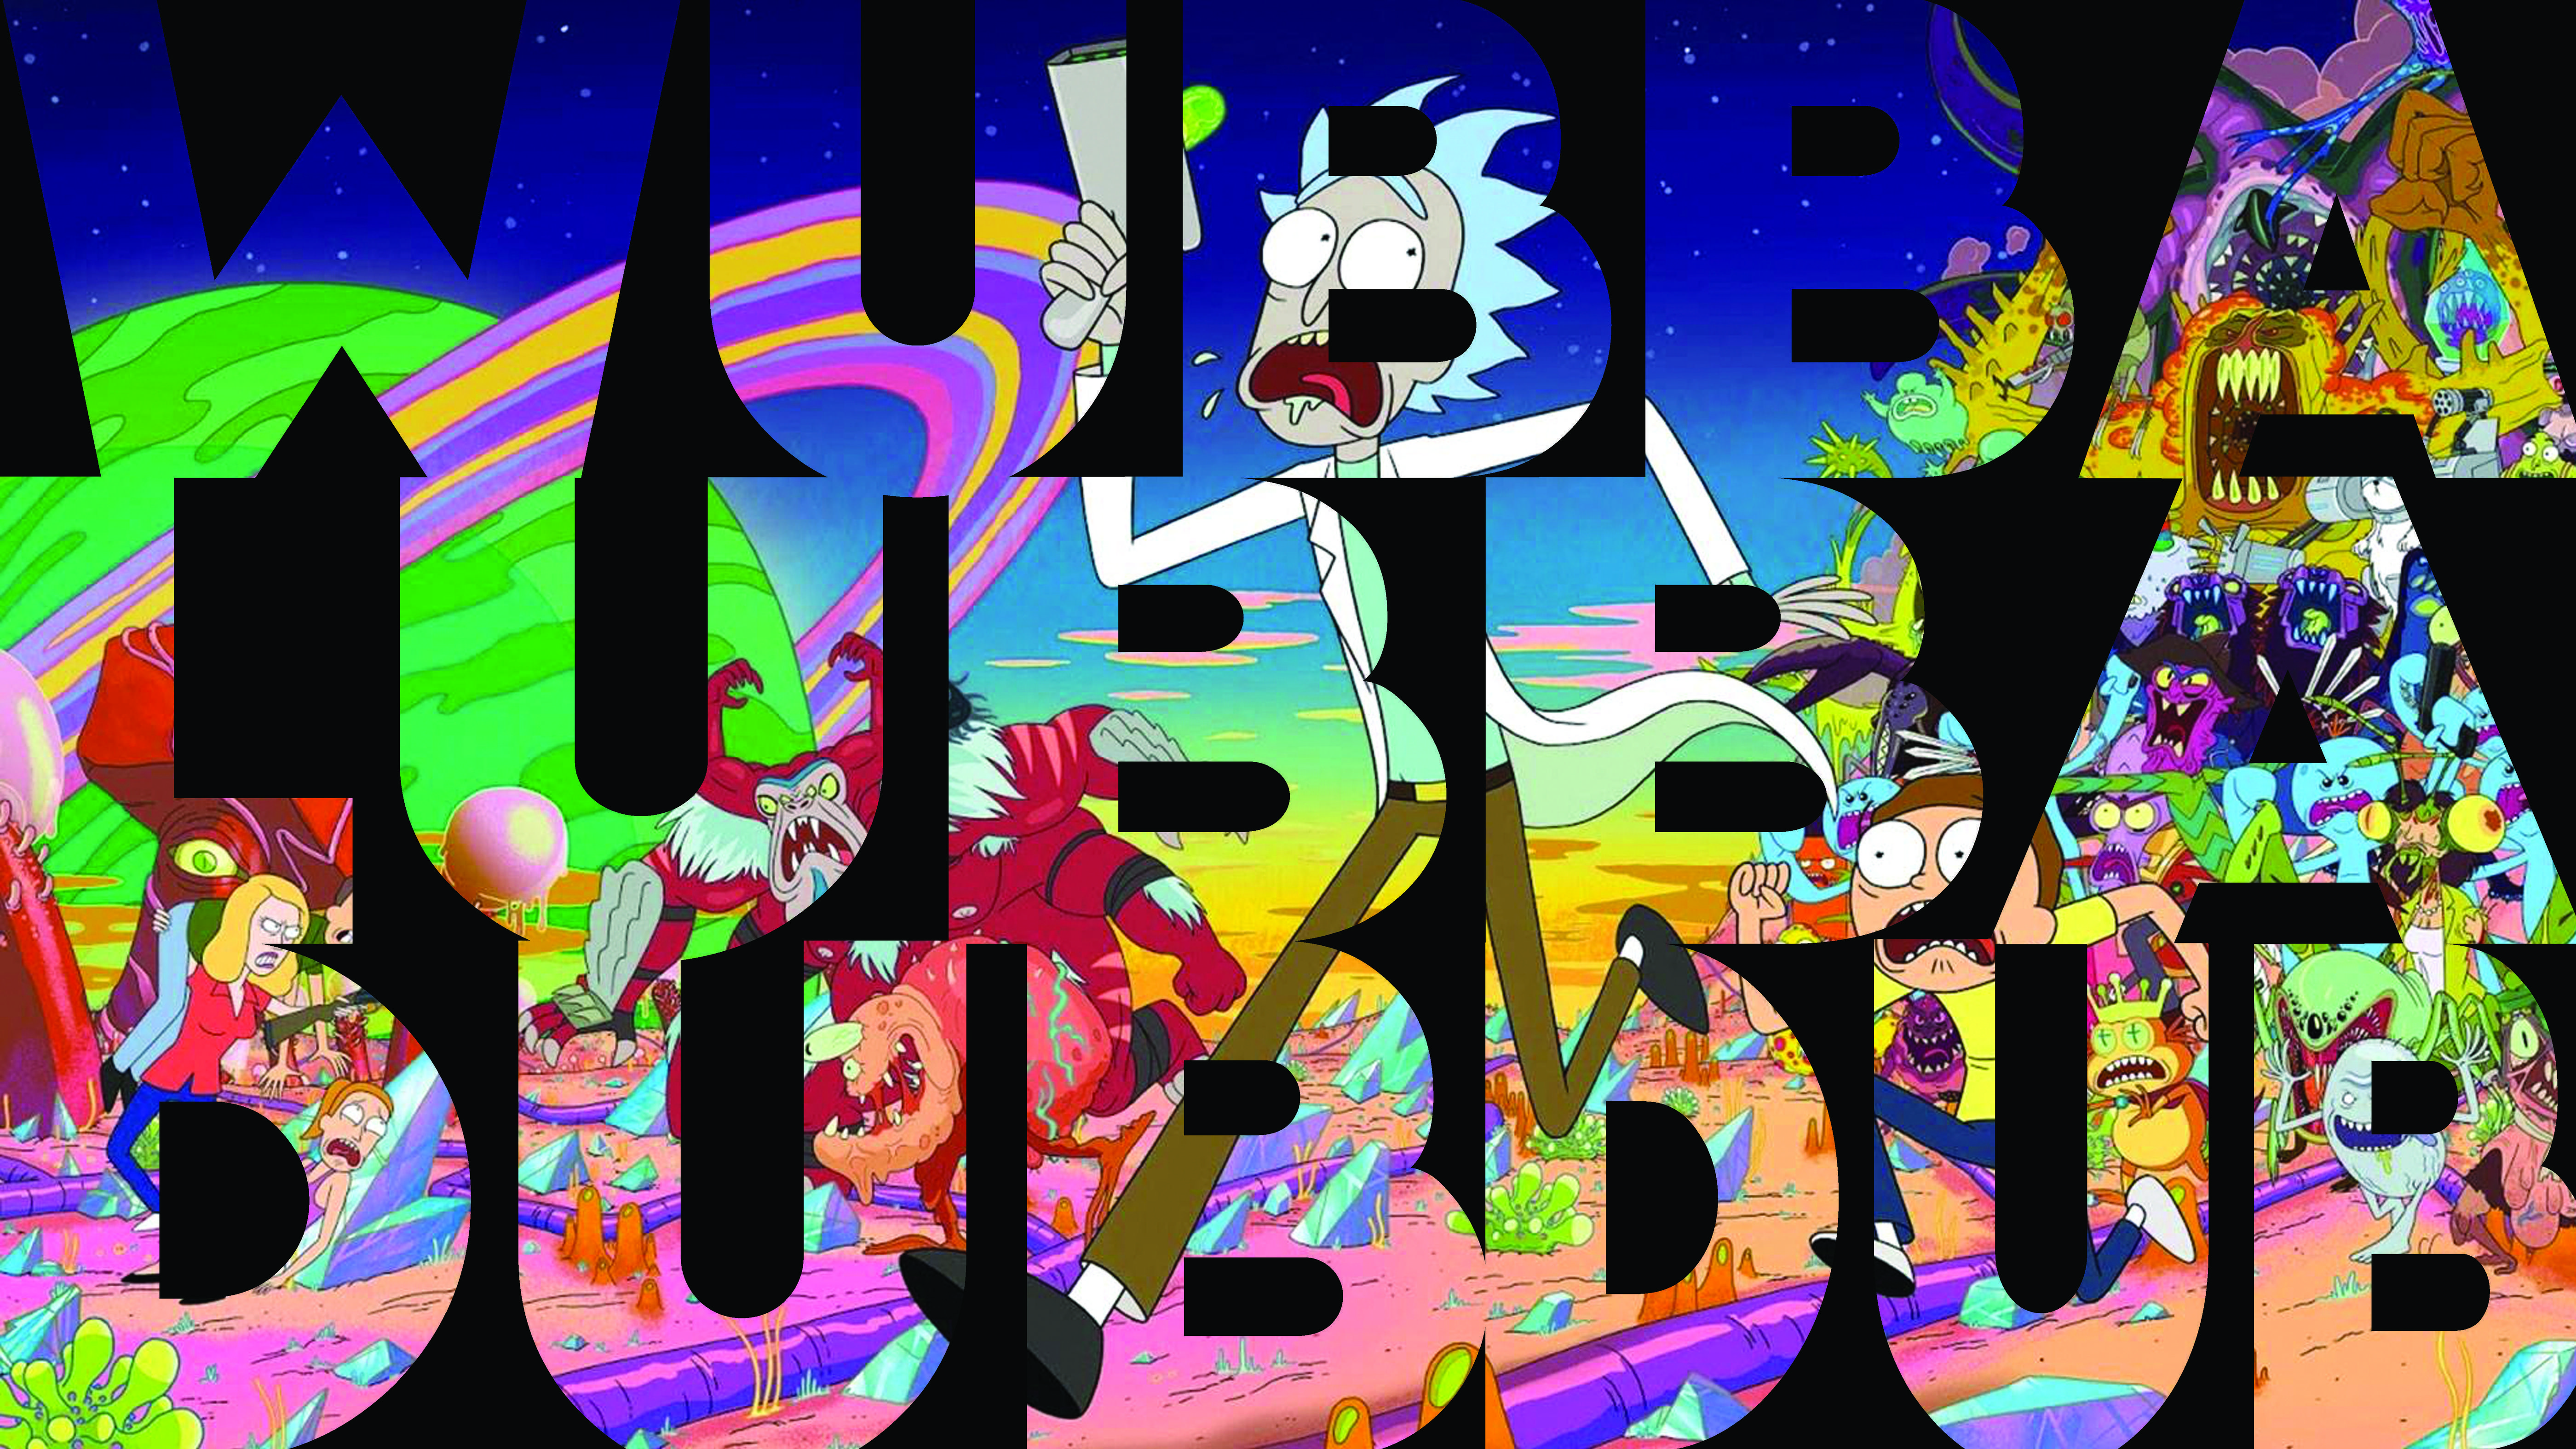 Trippy Rick and Morty Laptop Wallpaper Free Trippy Rick and Morty Laptop Background